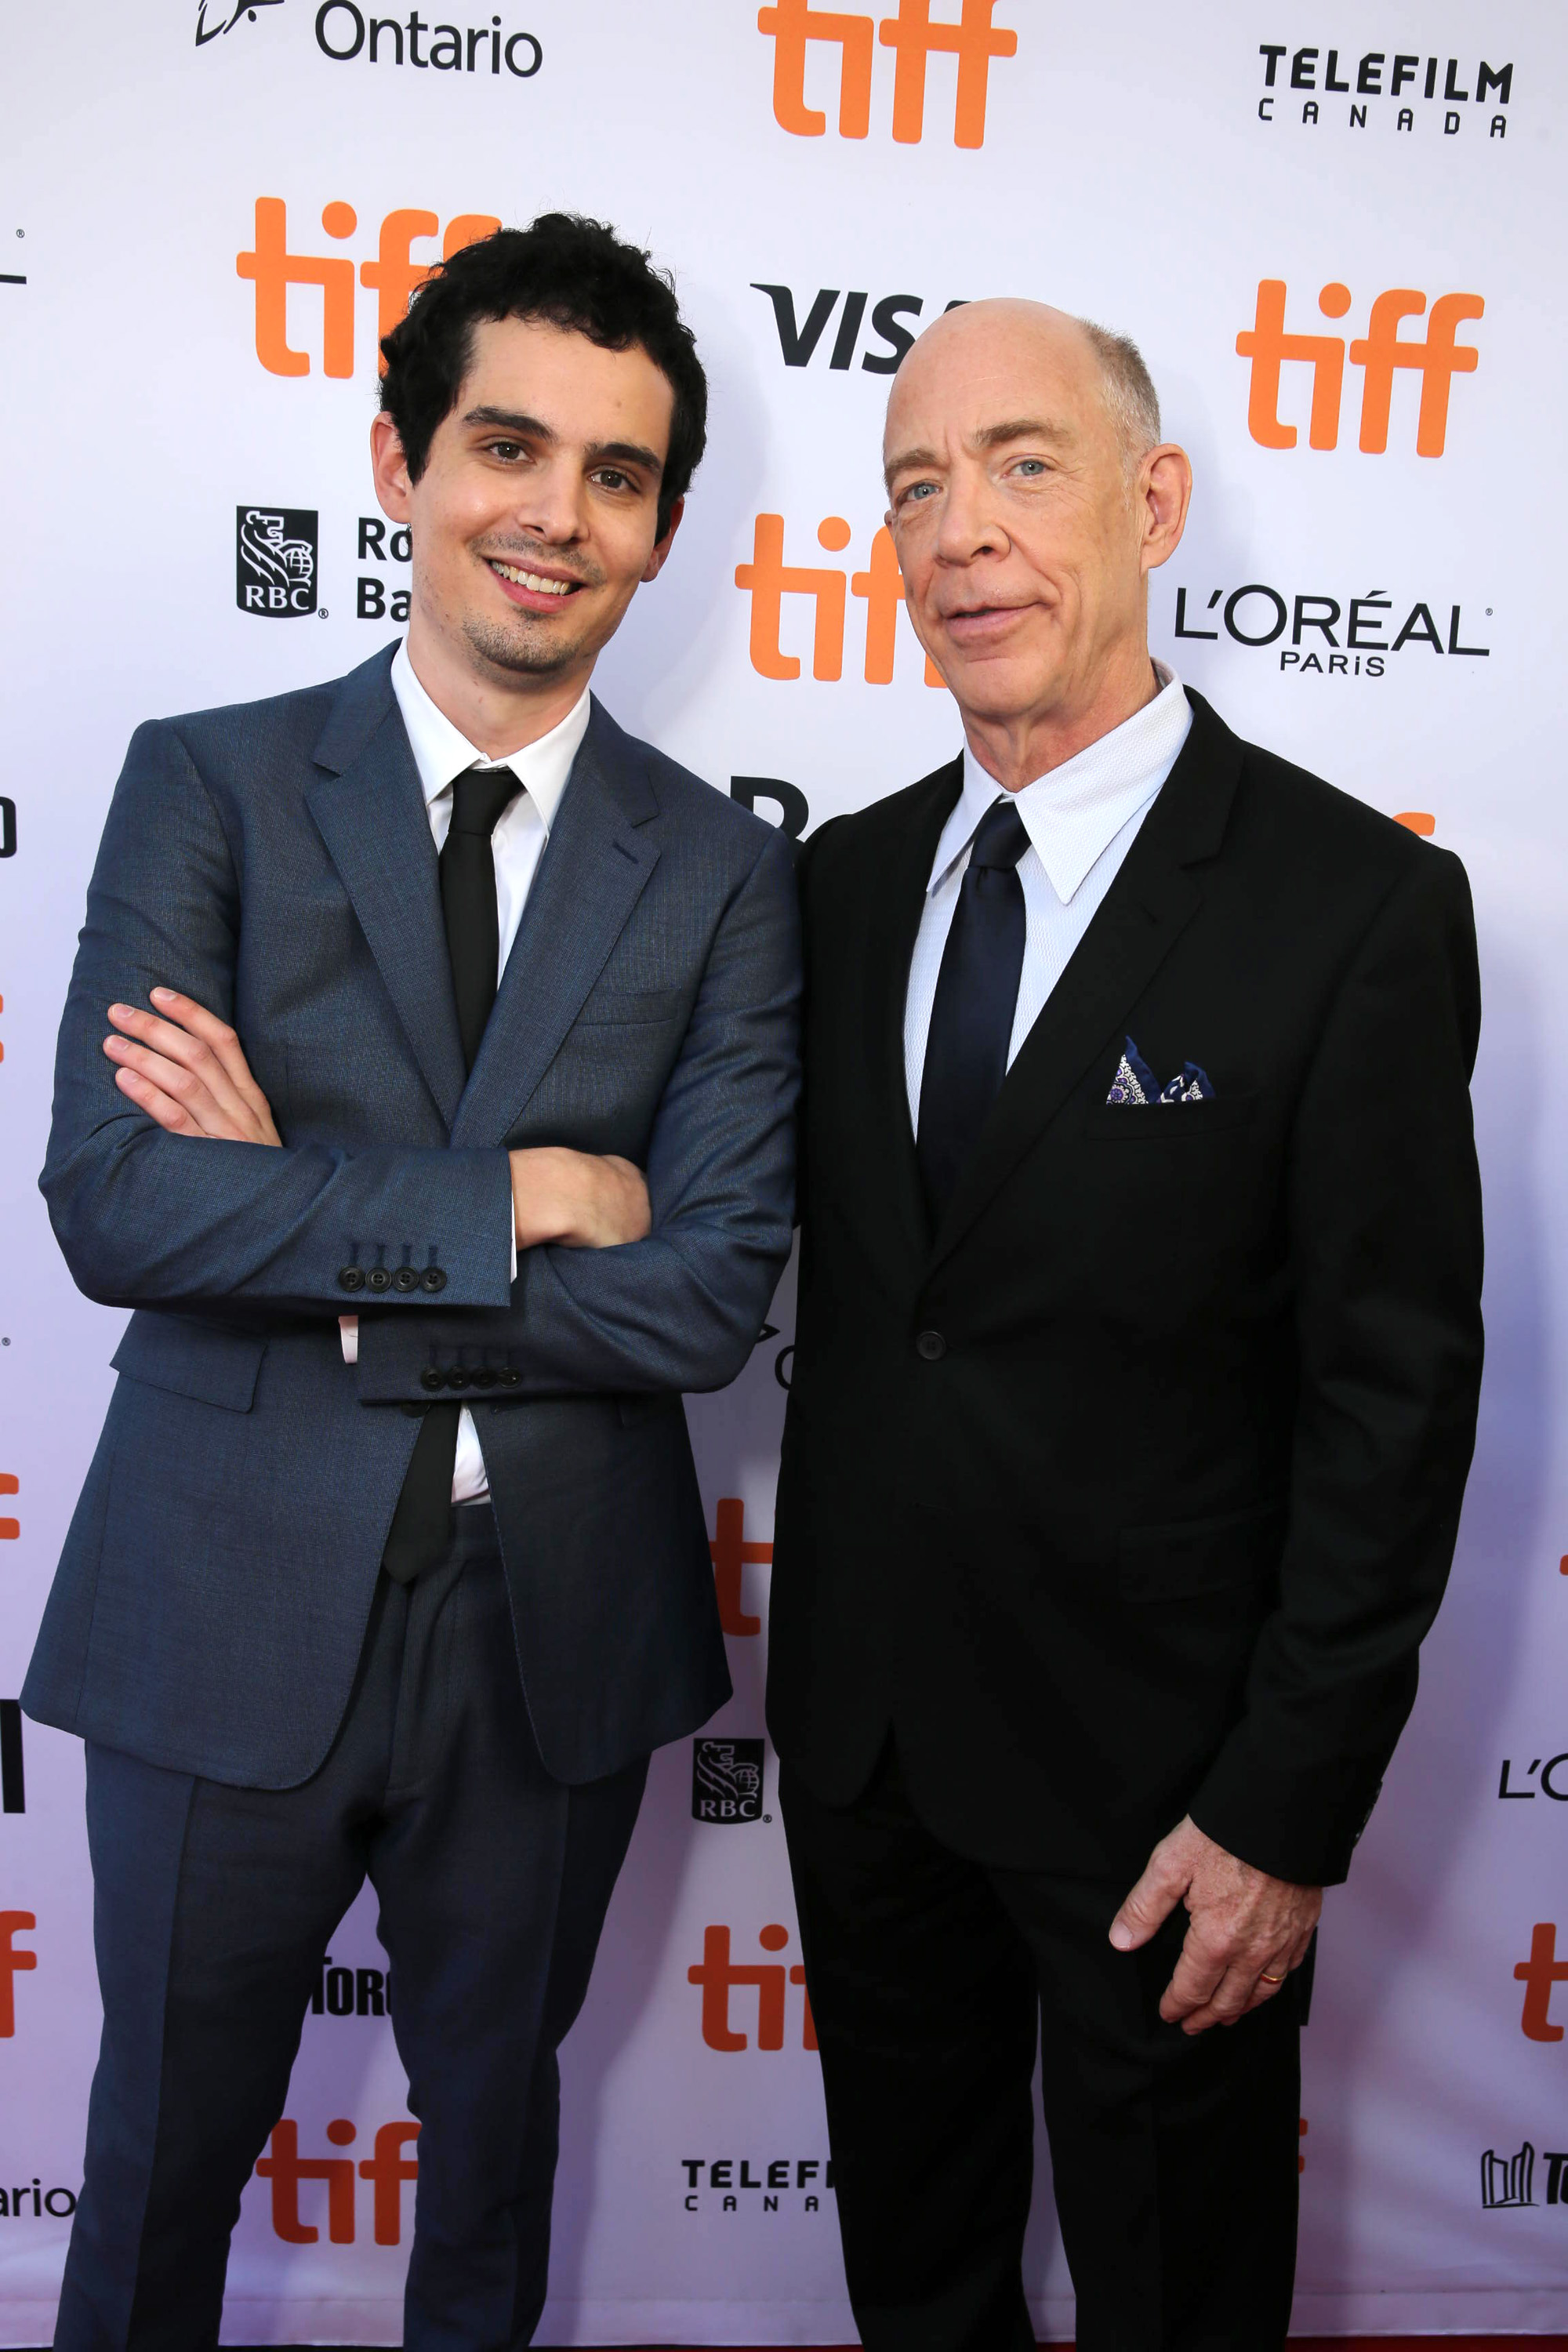 Writer/Director Damien Chazelle and J.K. Simmons seen at Summit Entertainment's "La La Land" premiere at the 2016 Toronto International Film Festival on Monday, Sept. 12, 2016, in Toronto. (Photo by Eric Charbonneau/Invision for LionsgateAP Images)